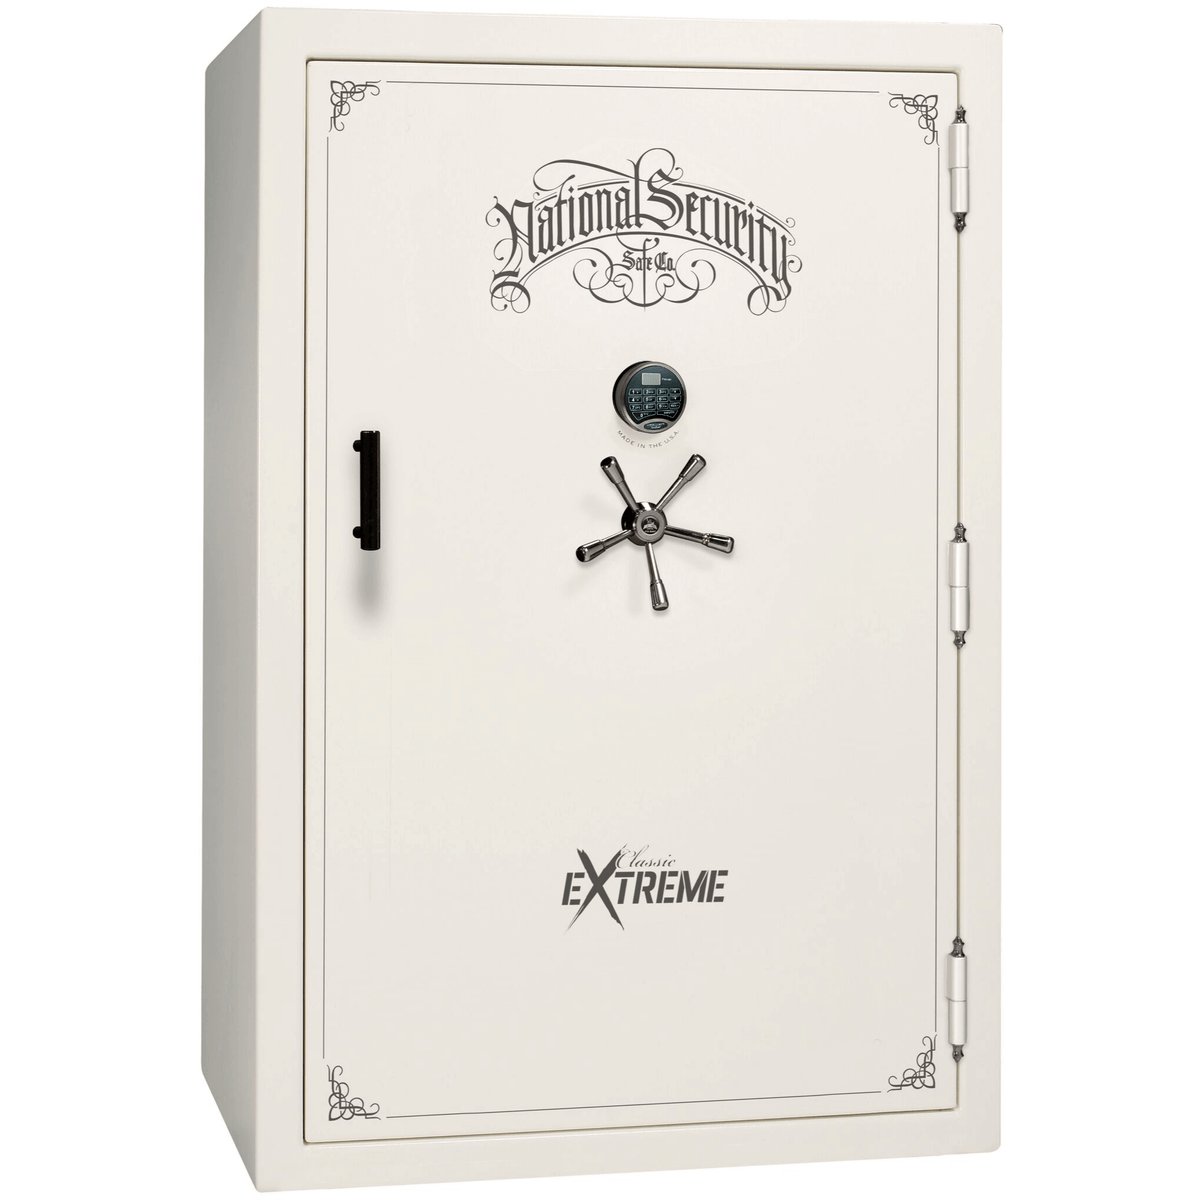 Liberty Classic Select Extreme Wide Body Safe in White Gloss with Black Chrome Electronic Lock.